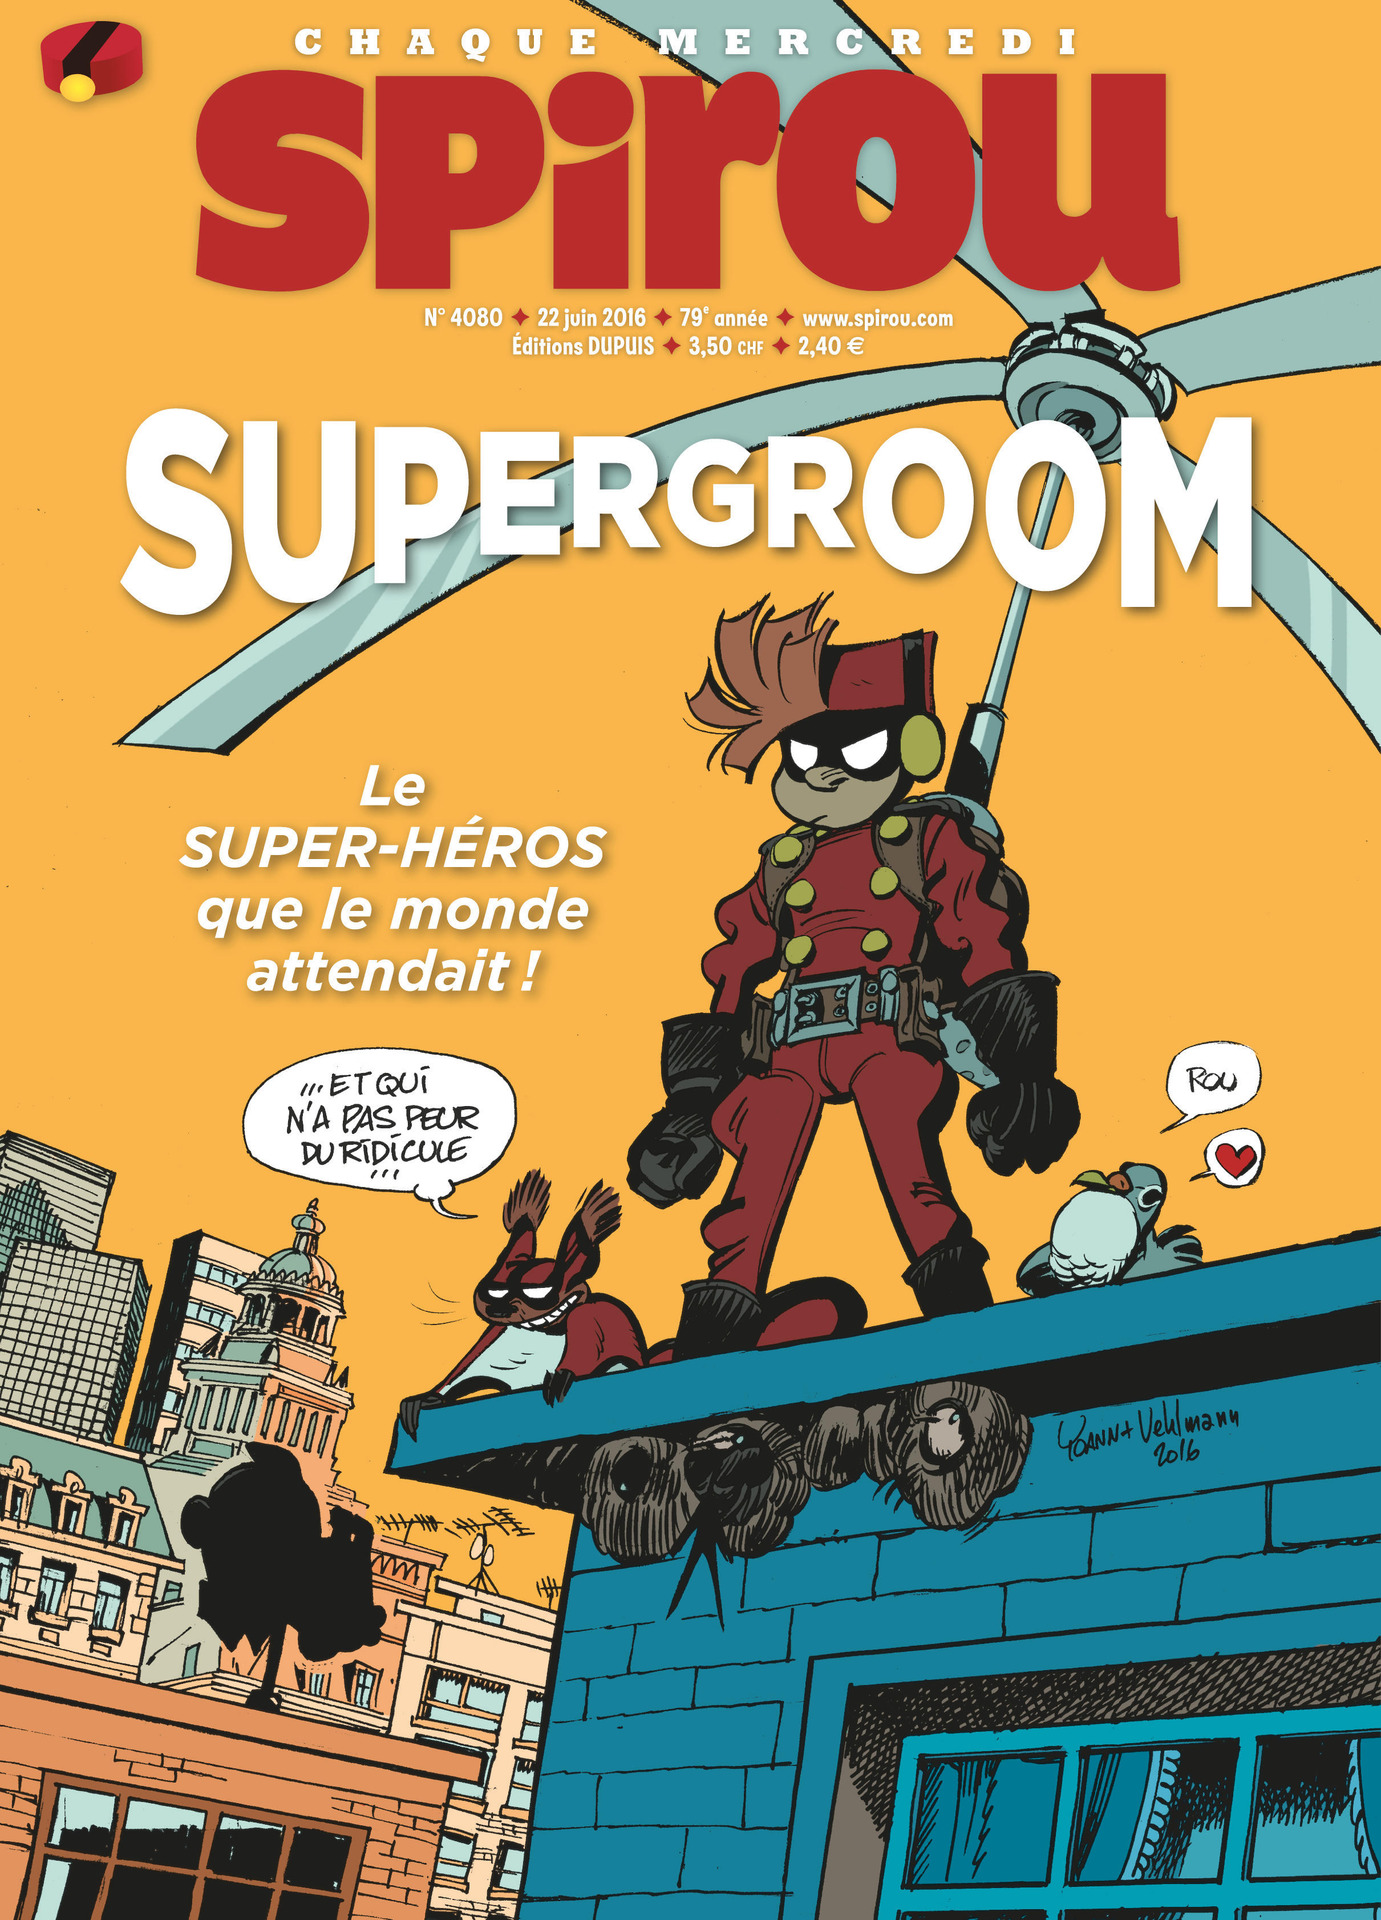 Journal de Spirou #4080 cover (ill. Yoann & Vehlmann; Copyright (c) 2016 Dupuis and the artists; image from izneo.com)